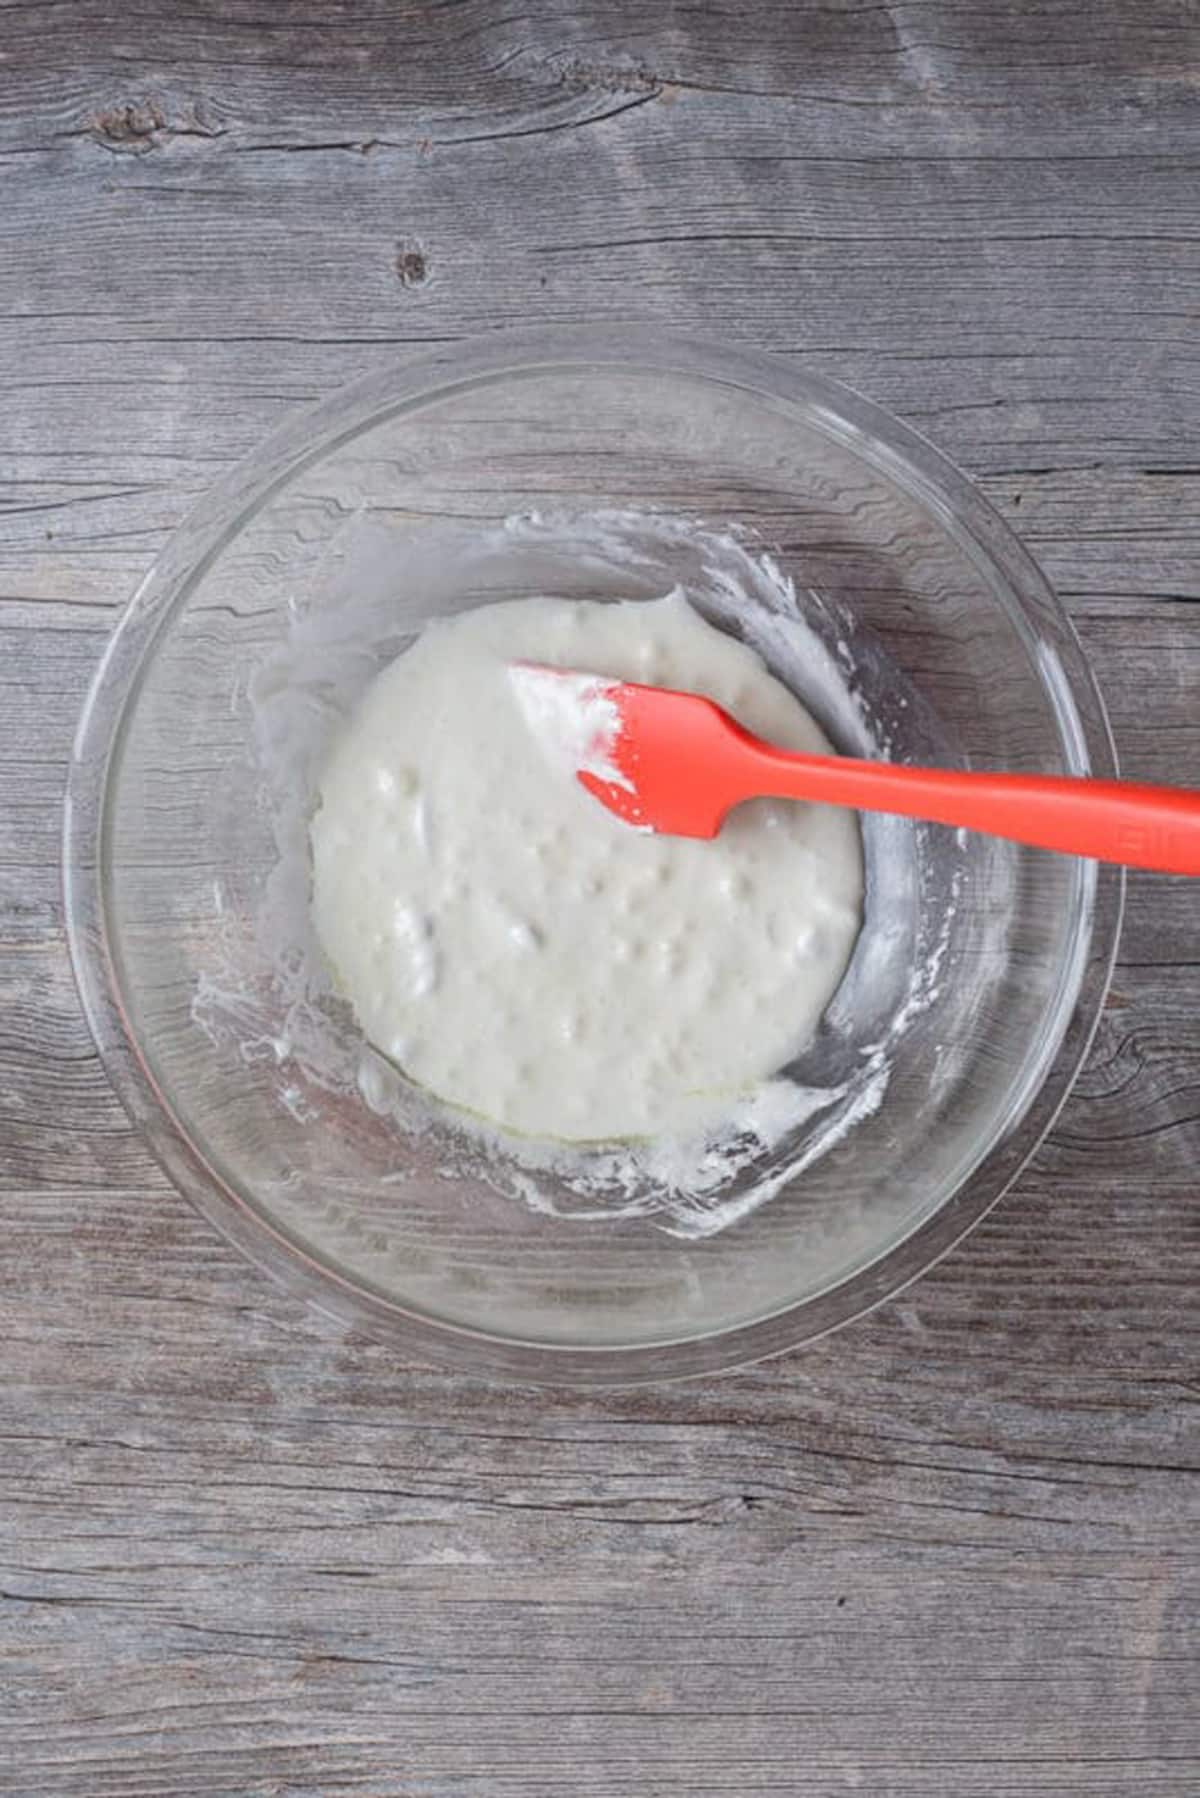 Melted marshmallows and butter in a clear bowl with a red spatula.